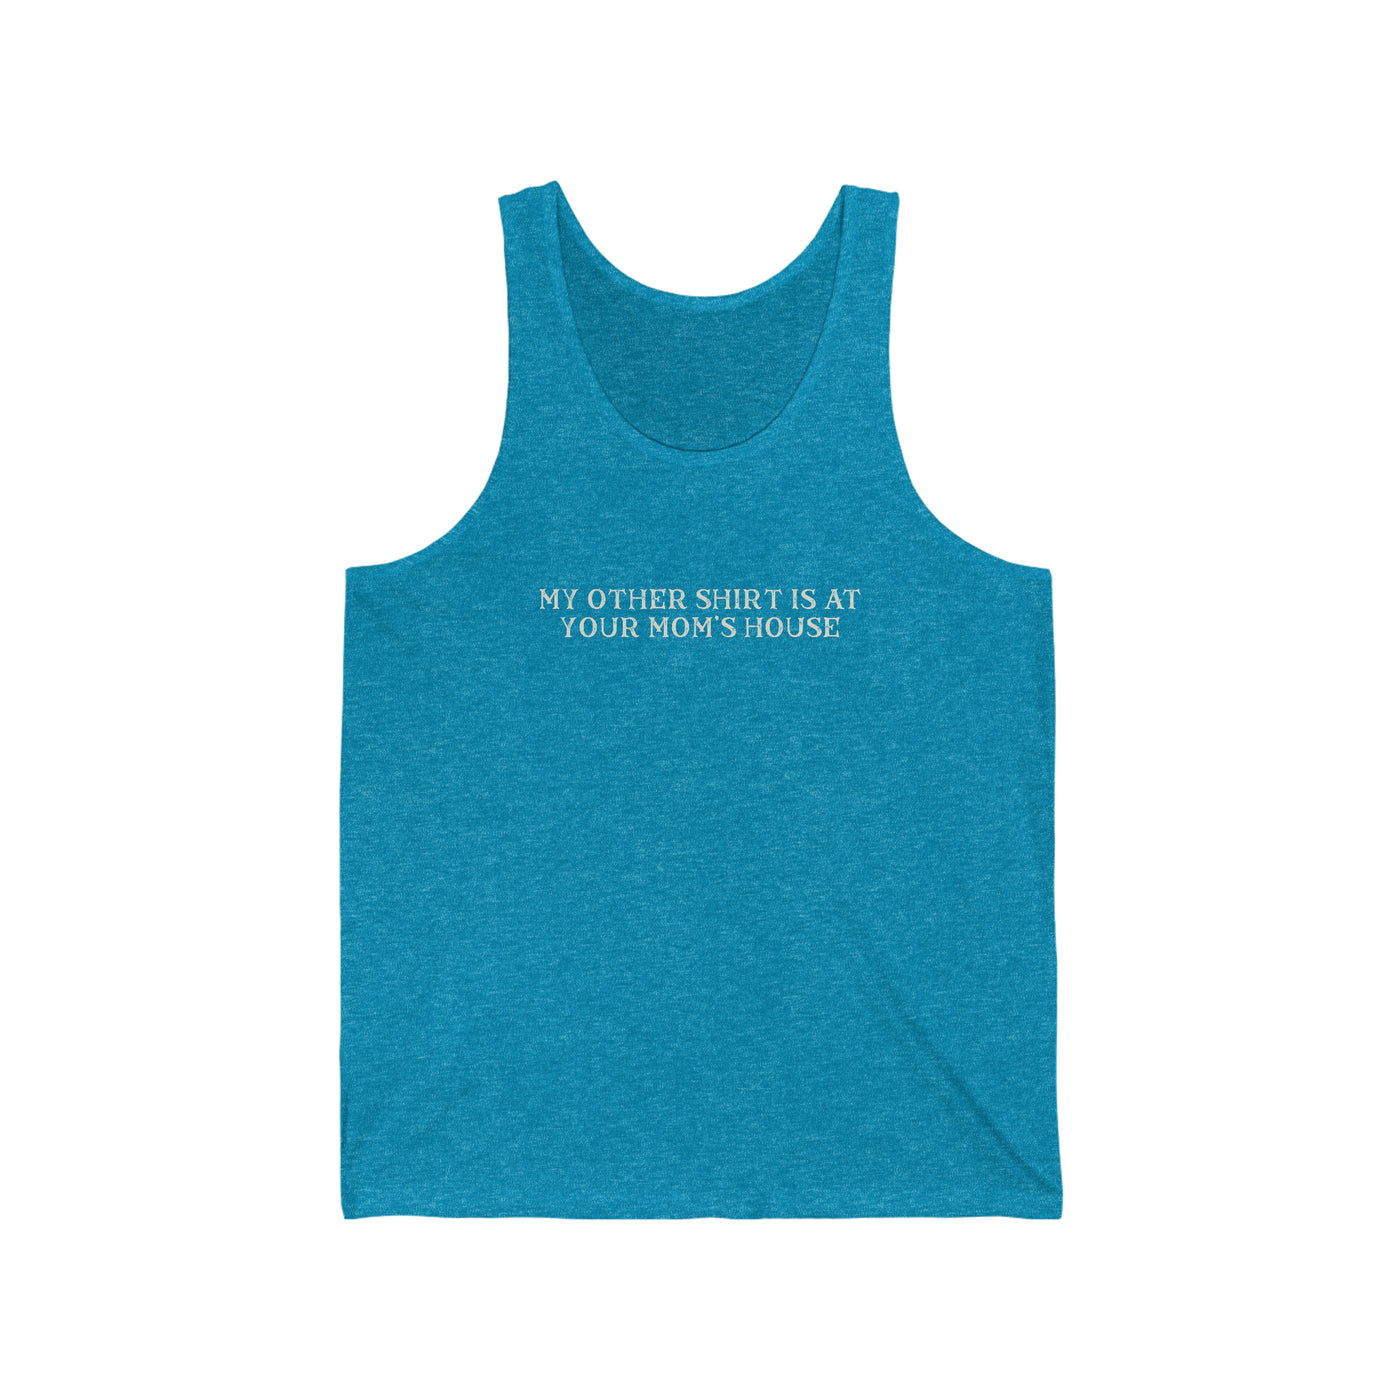 My Other Shirt Is At Your Mom's House Unisex Tank Top